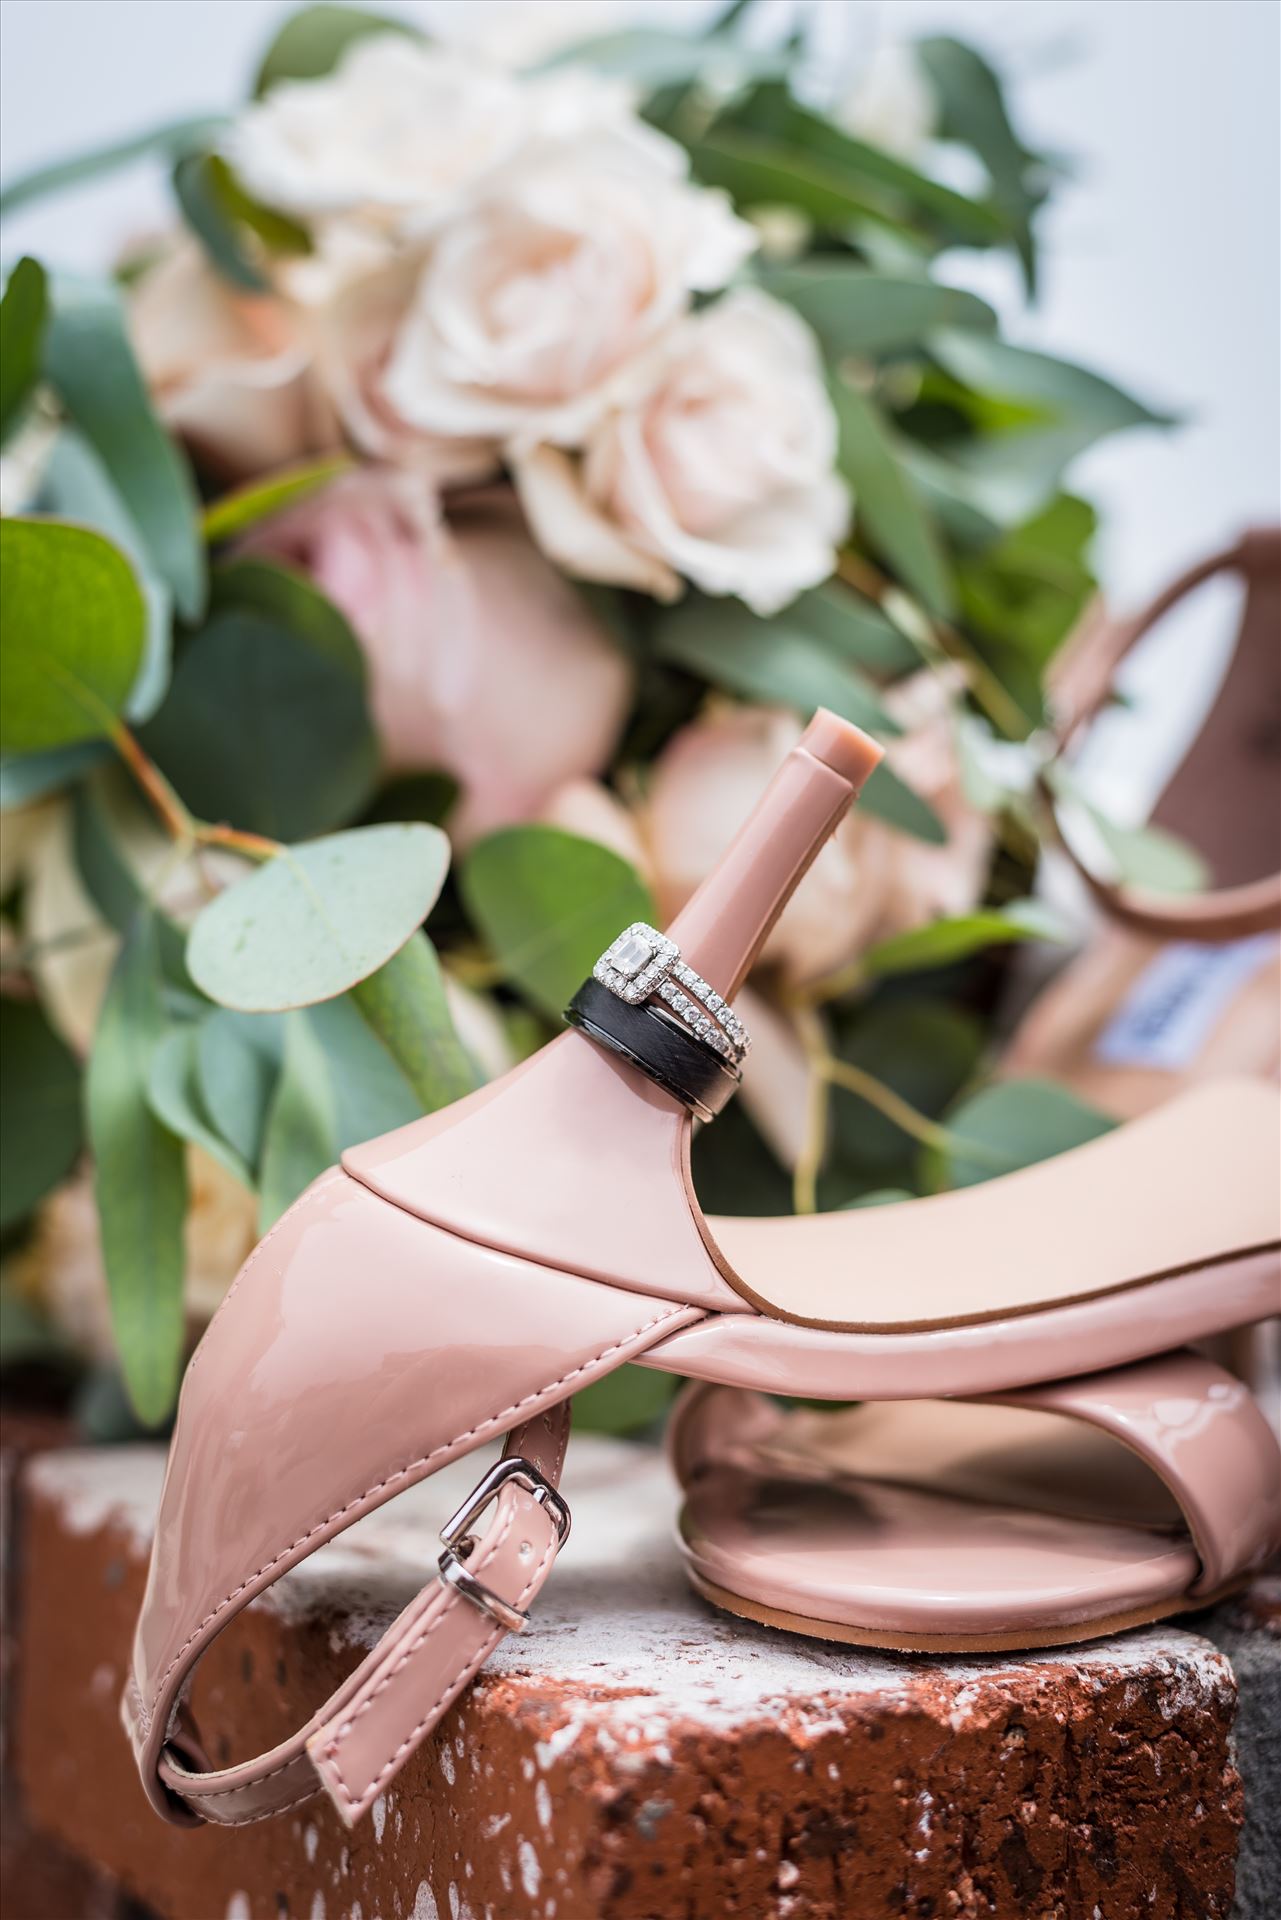 FW-5919.JPG - Cayucos California Beach and Bluffs Wedding near Morro Bay and Cambria with romantic chic flair by Mirror's Edge Photography, San Luis Obispo County Wedding Photographer.  Wedding rings, flowers and brides shoes by Sarah Williams